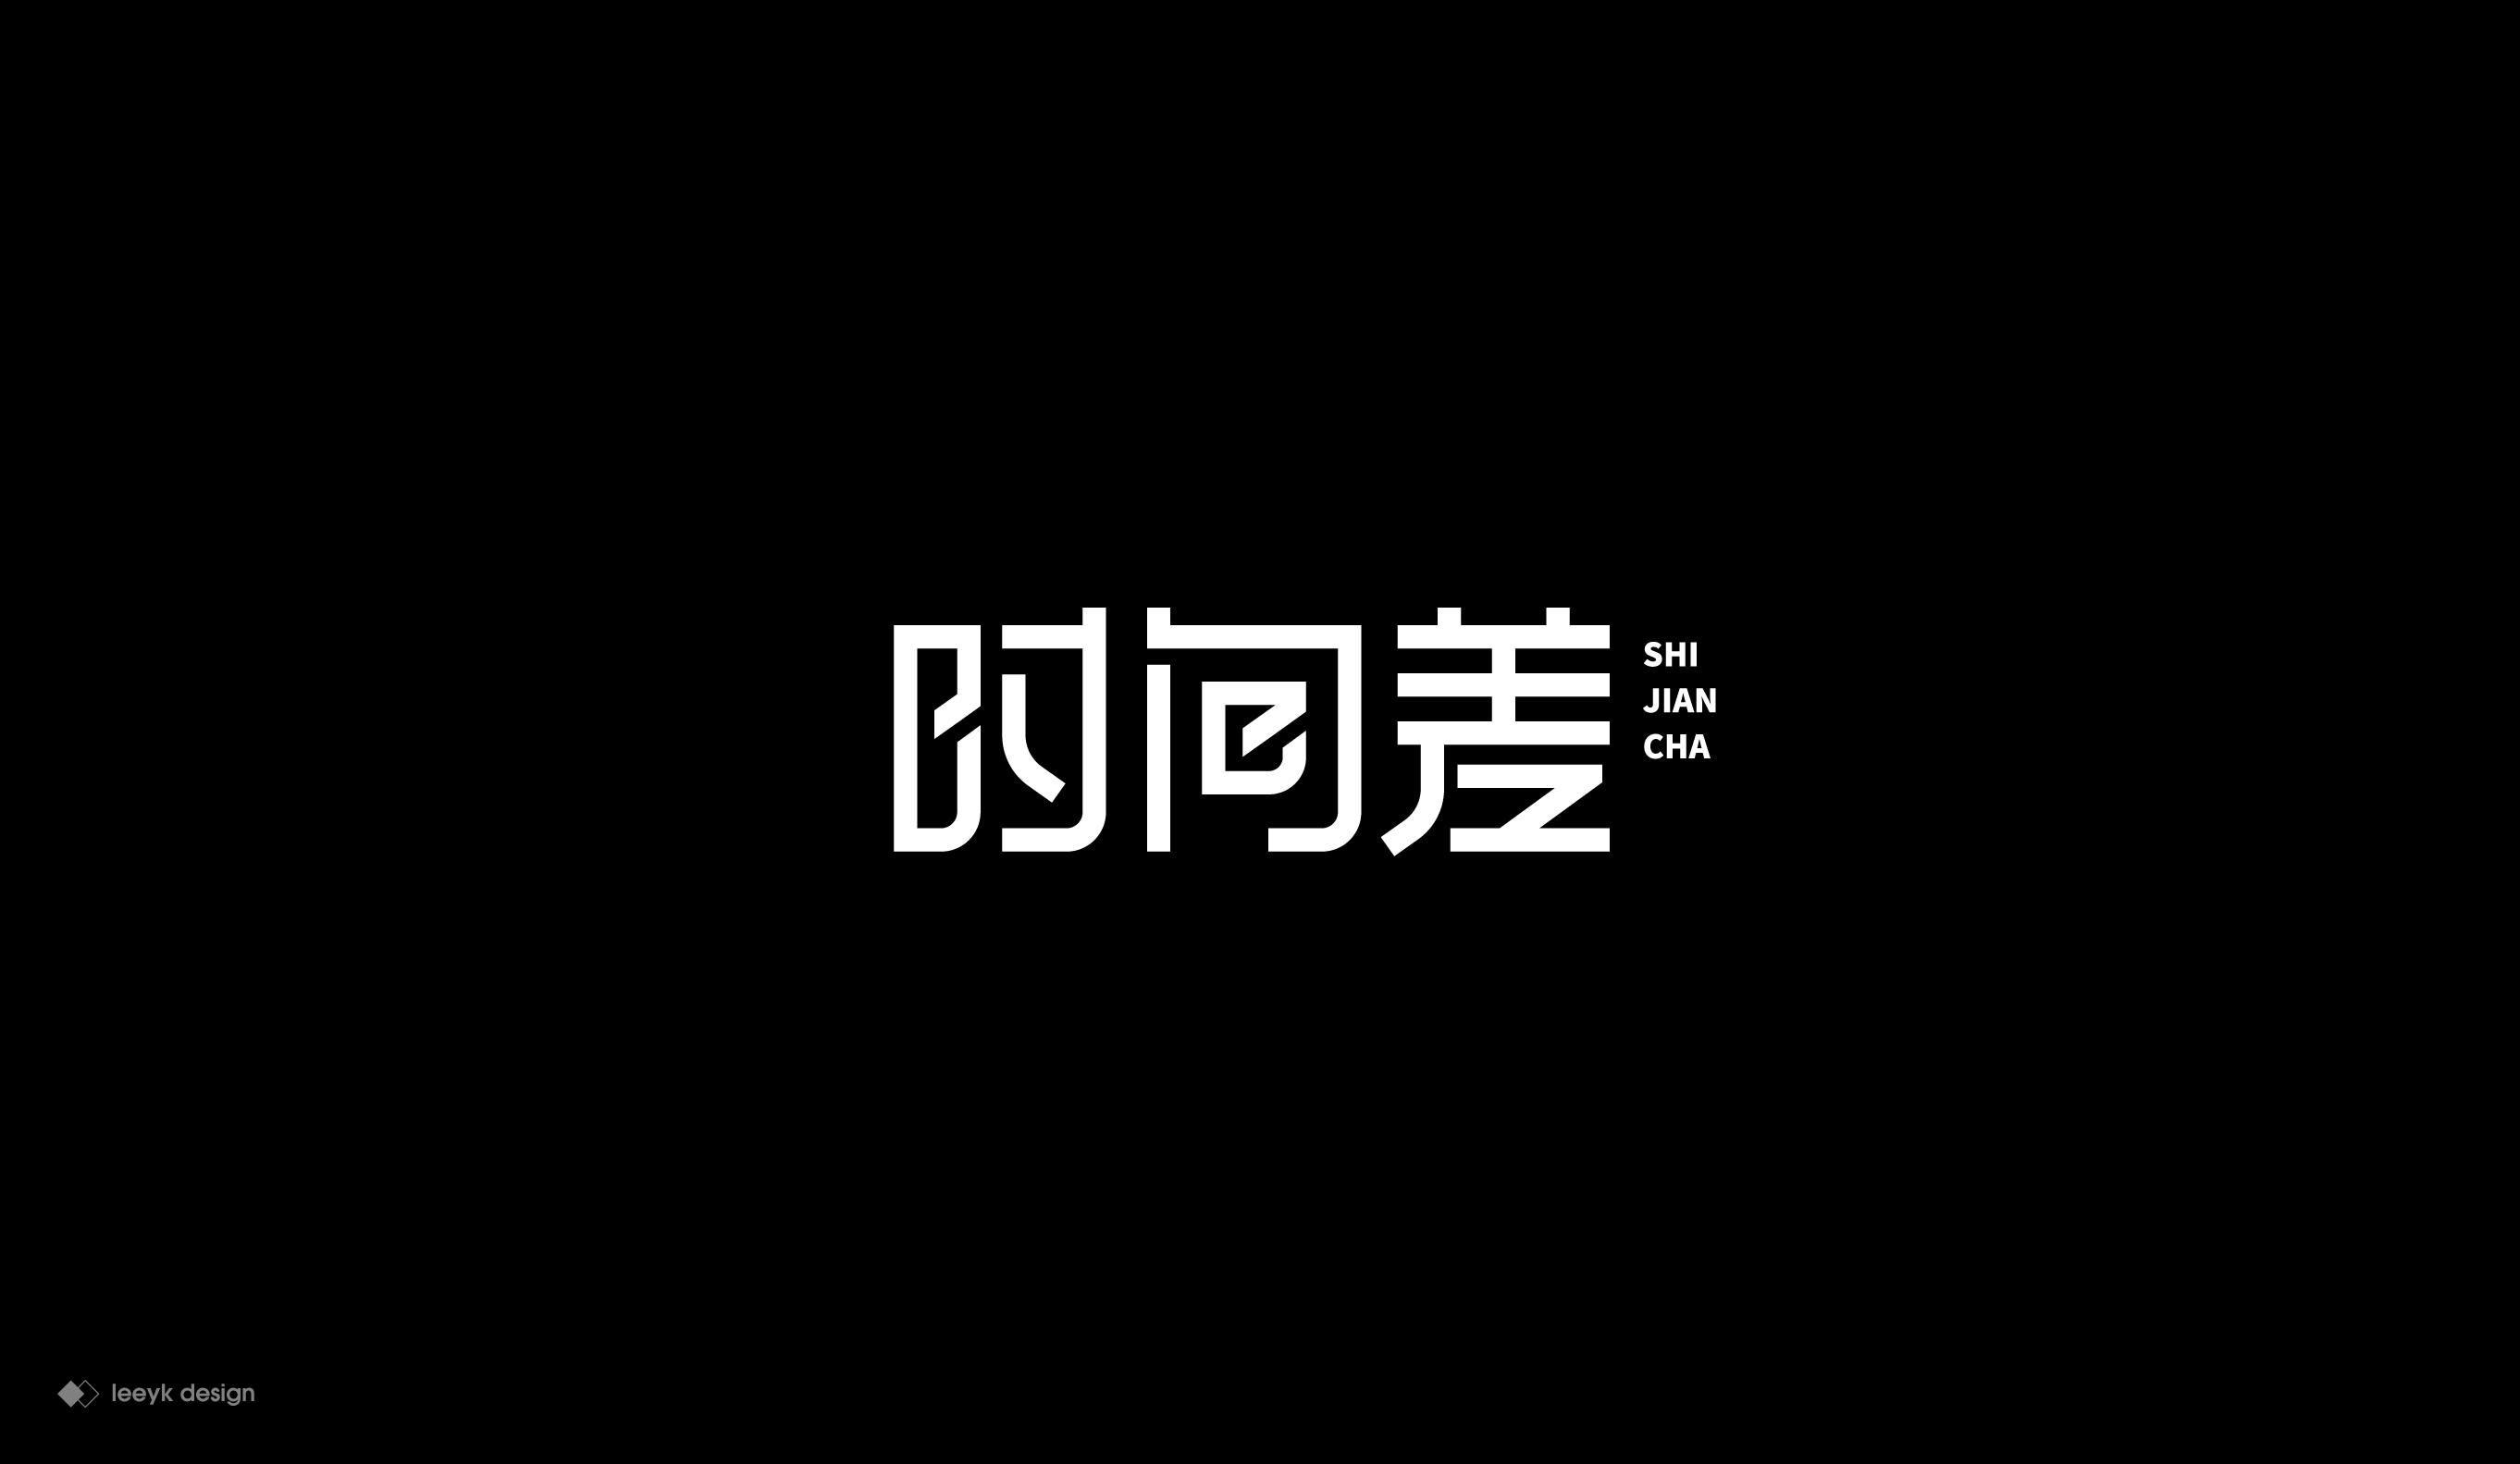 Interesting Chinese Creative Font Design-Selected Collection of Font Design in the First Half of 2020